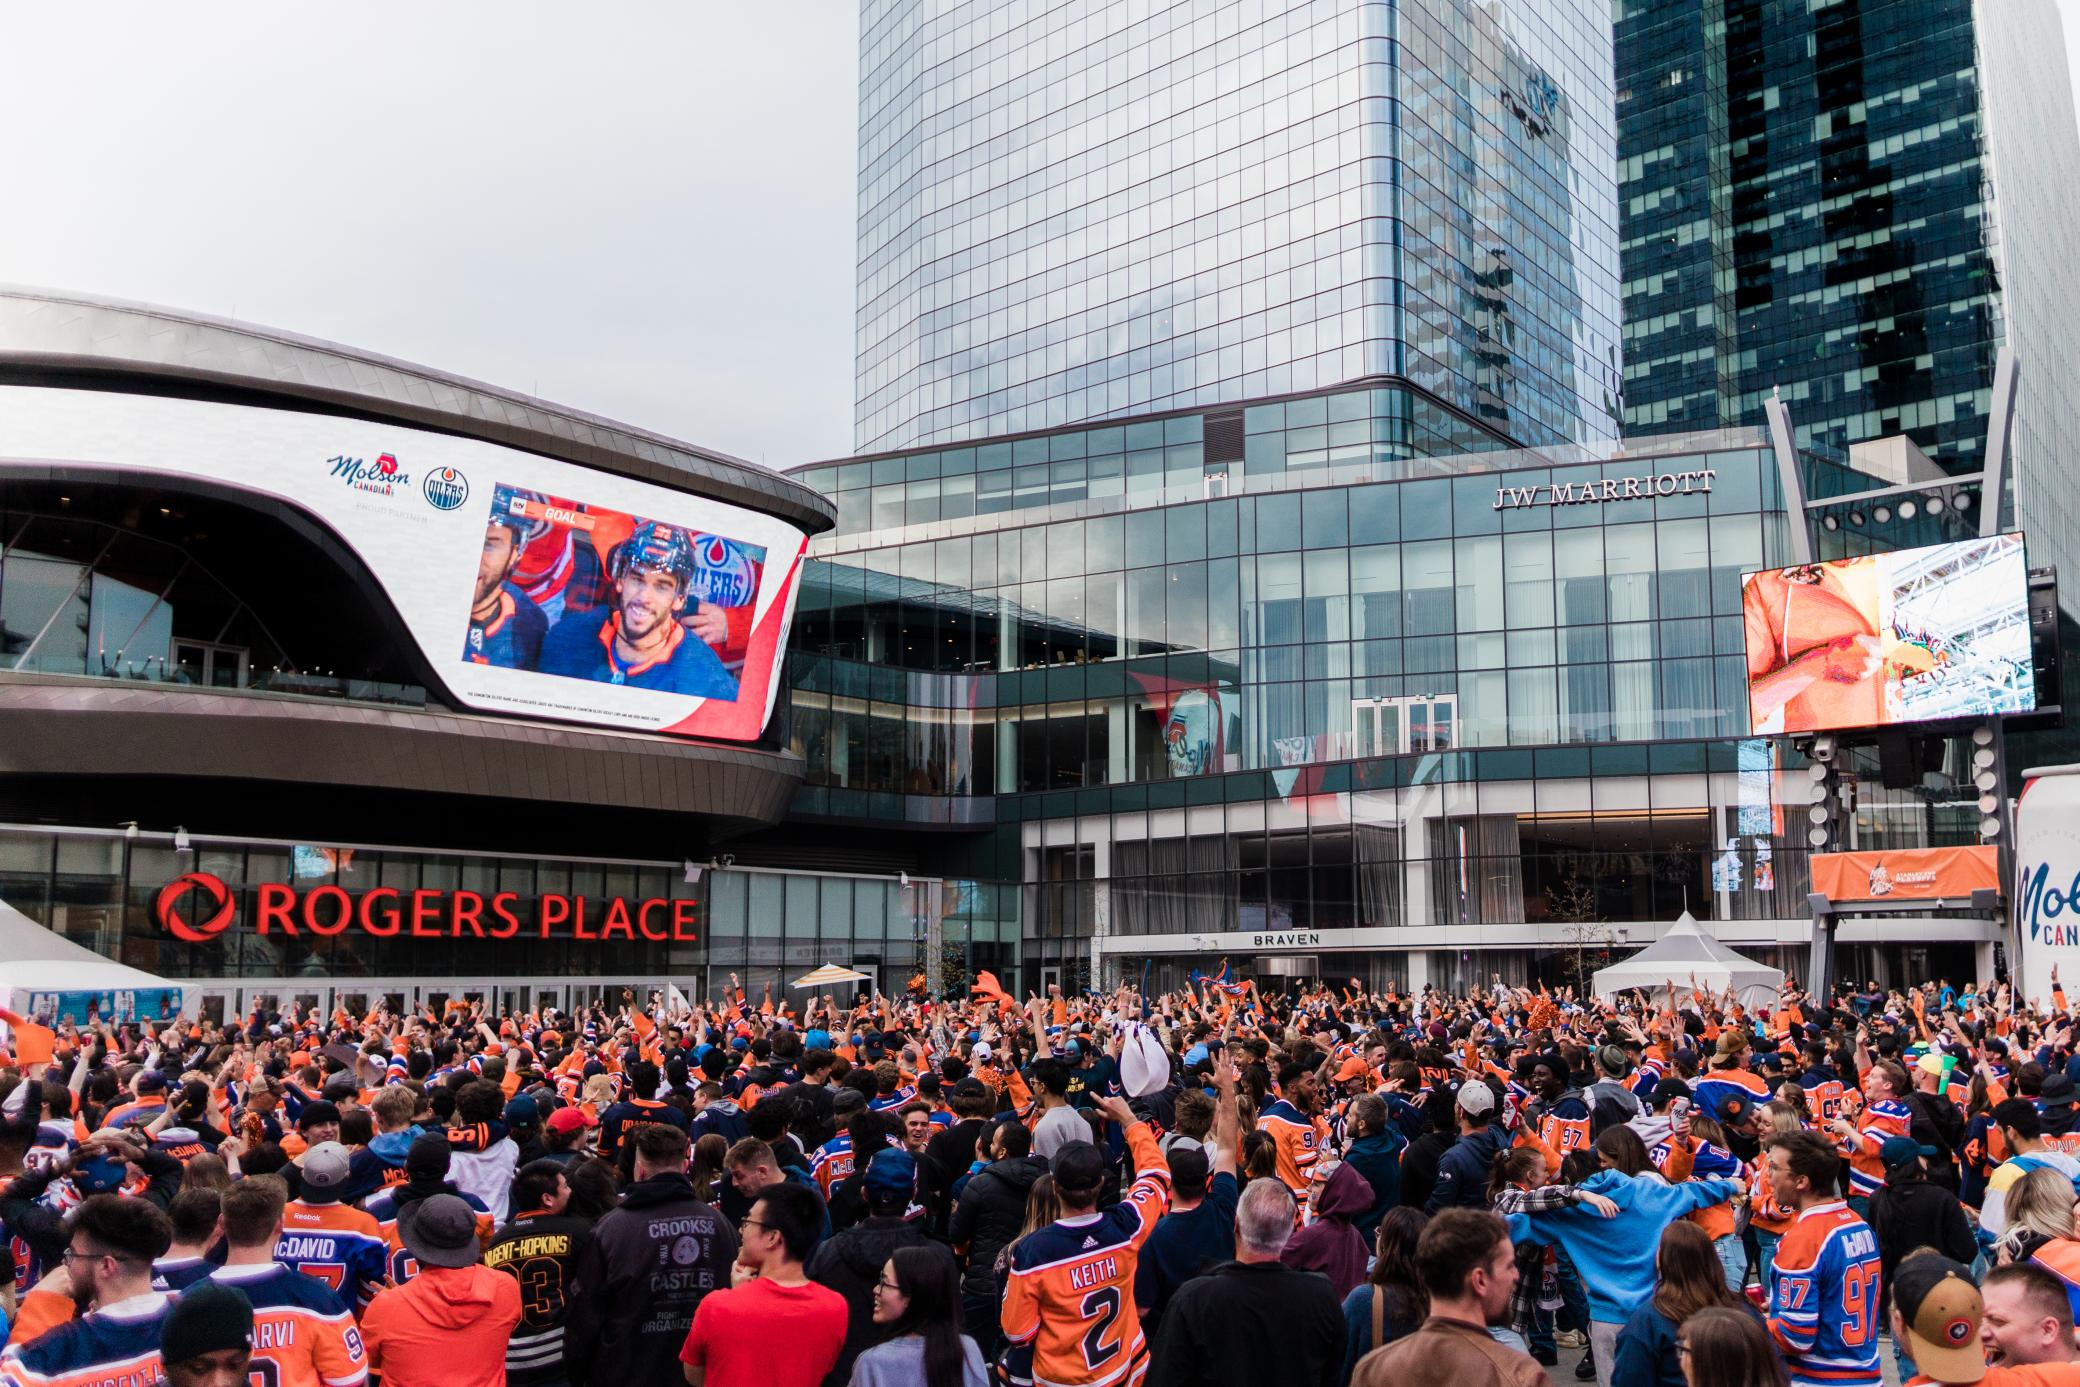 A massive crowd gathered watching the Oilers playoffs in Ice District Plaza.